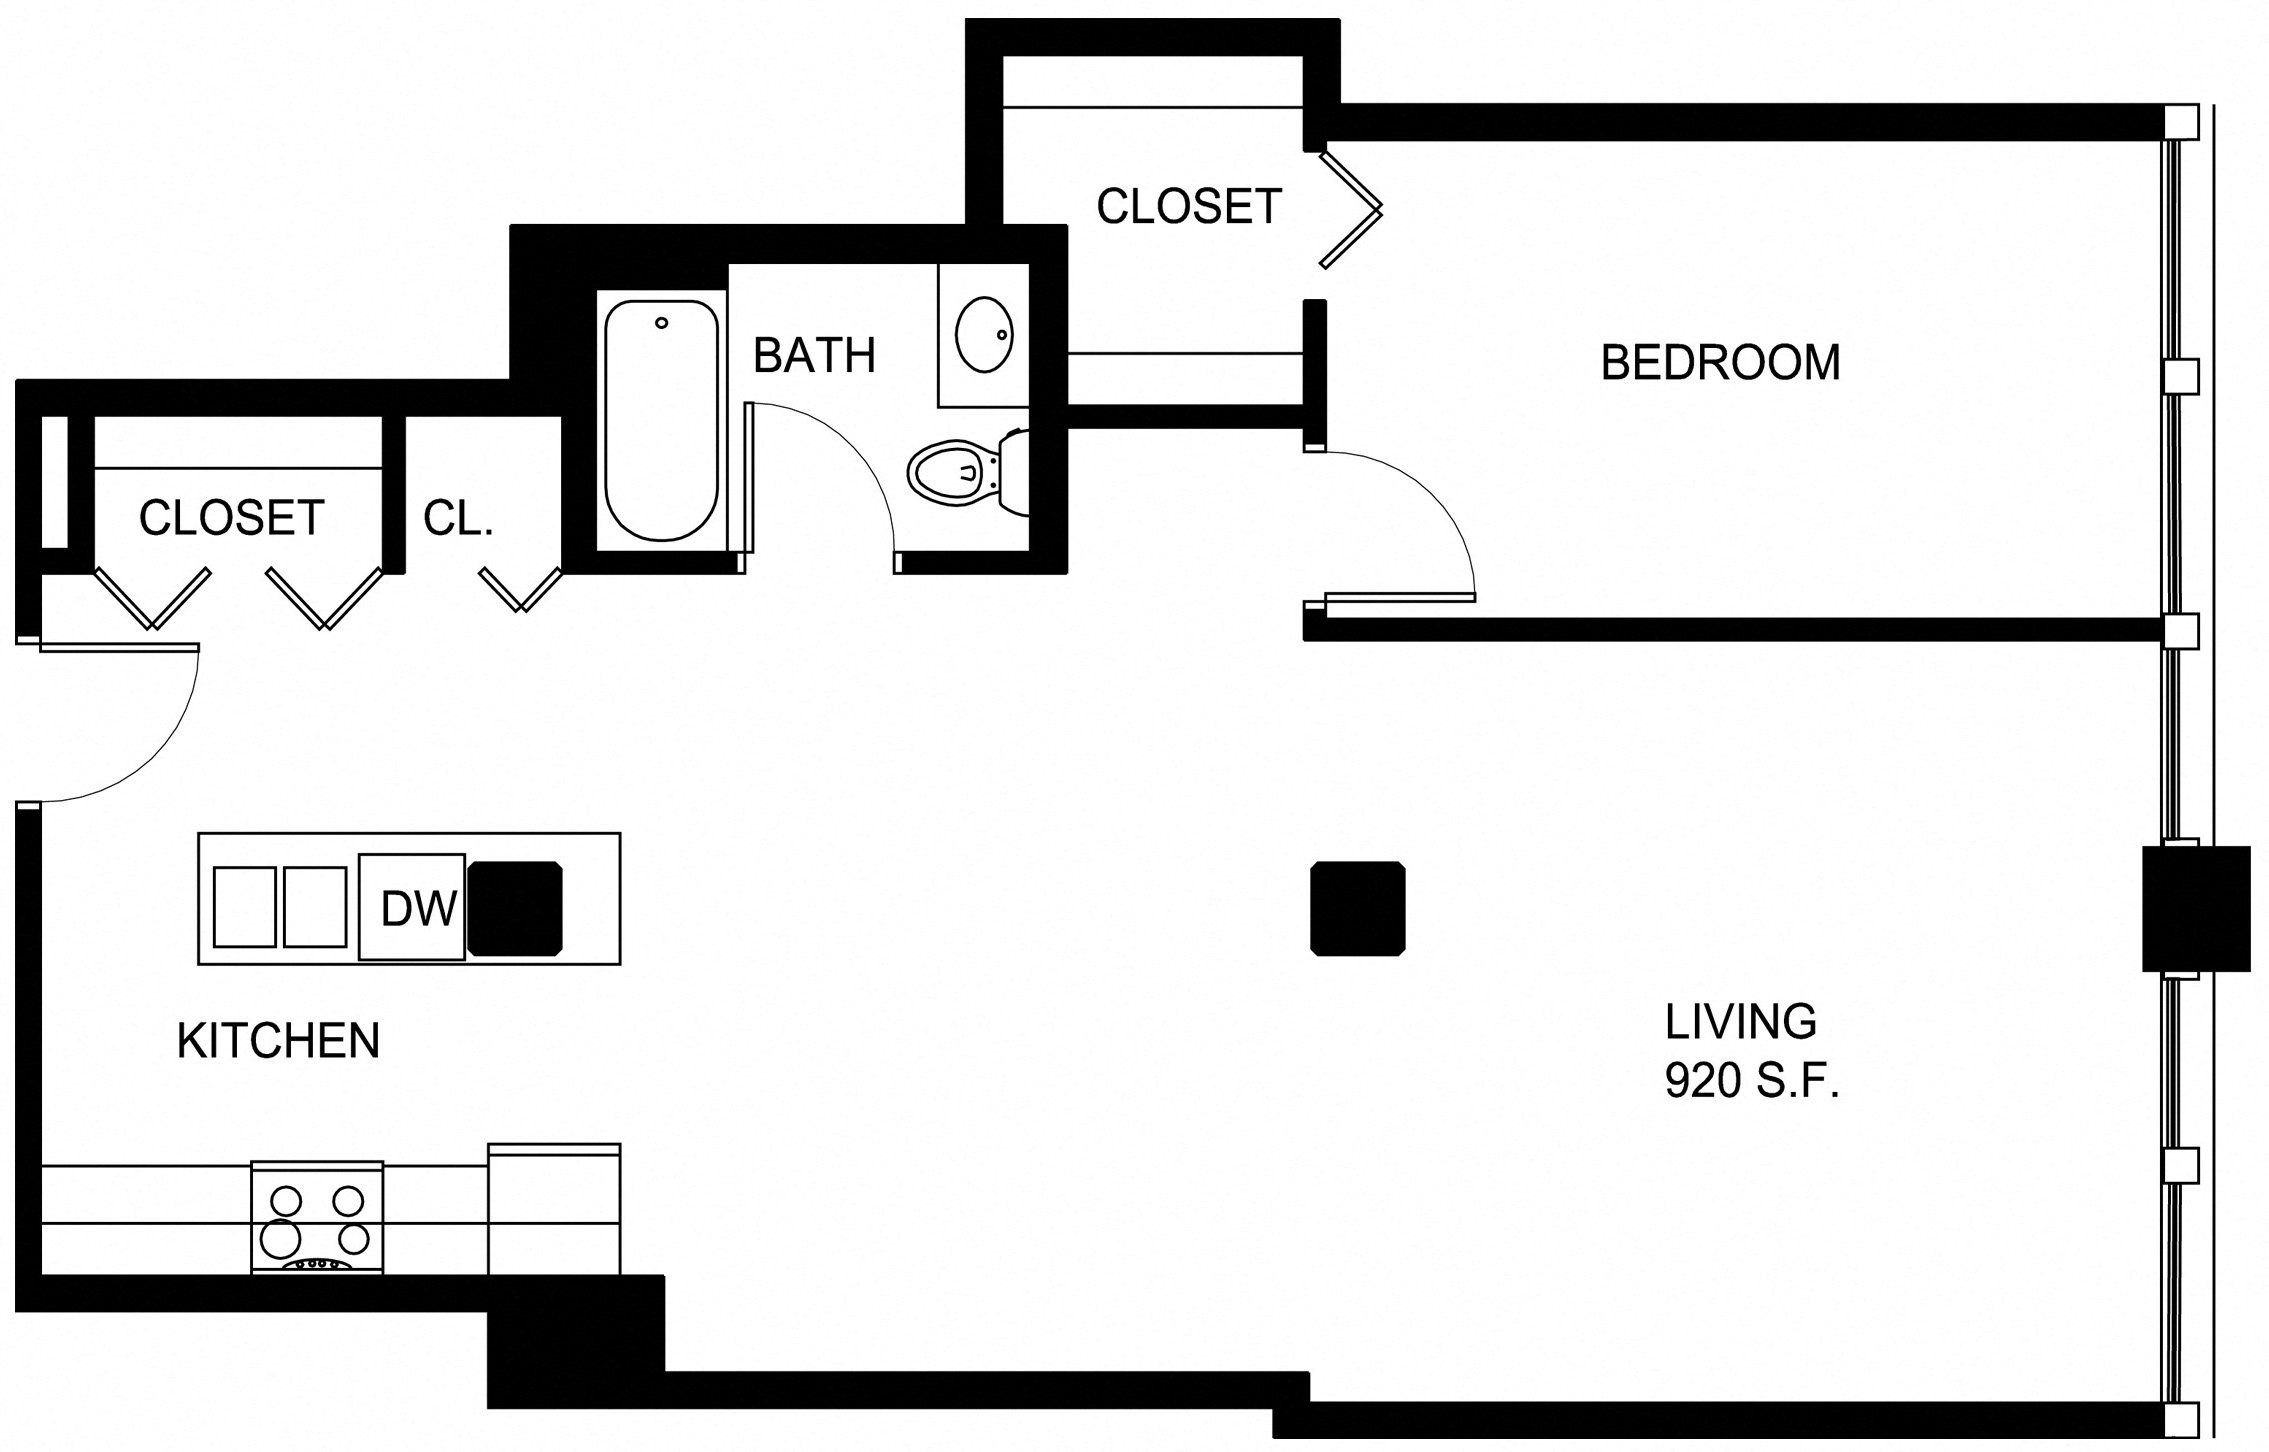 Floorplan for Apartment #P233, 1 bedroom unit at Halstead Providence